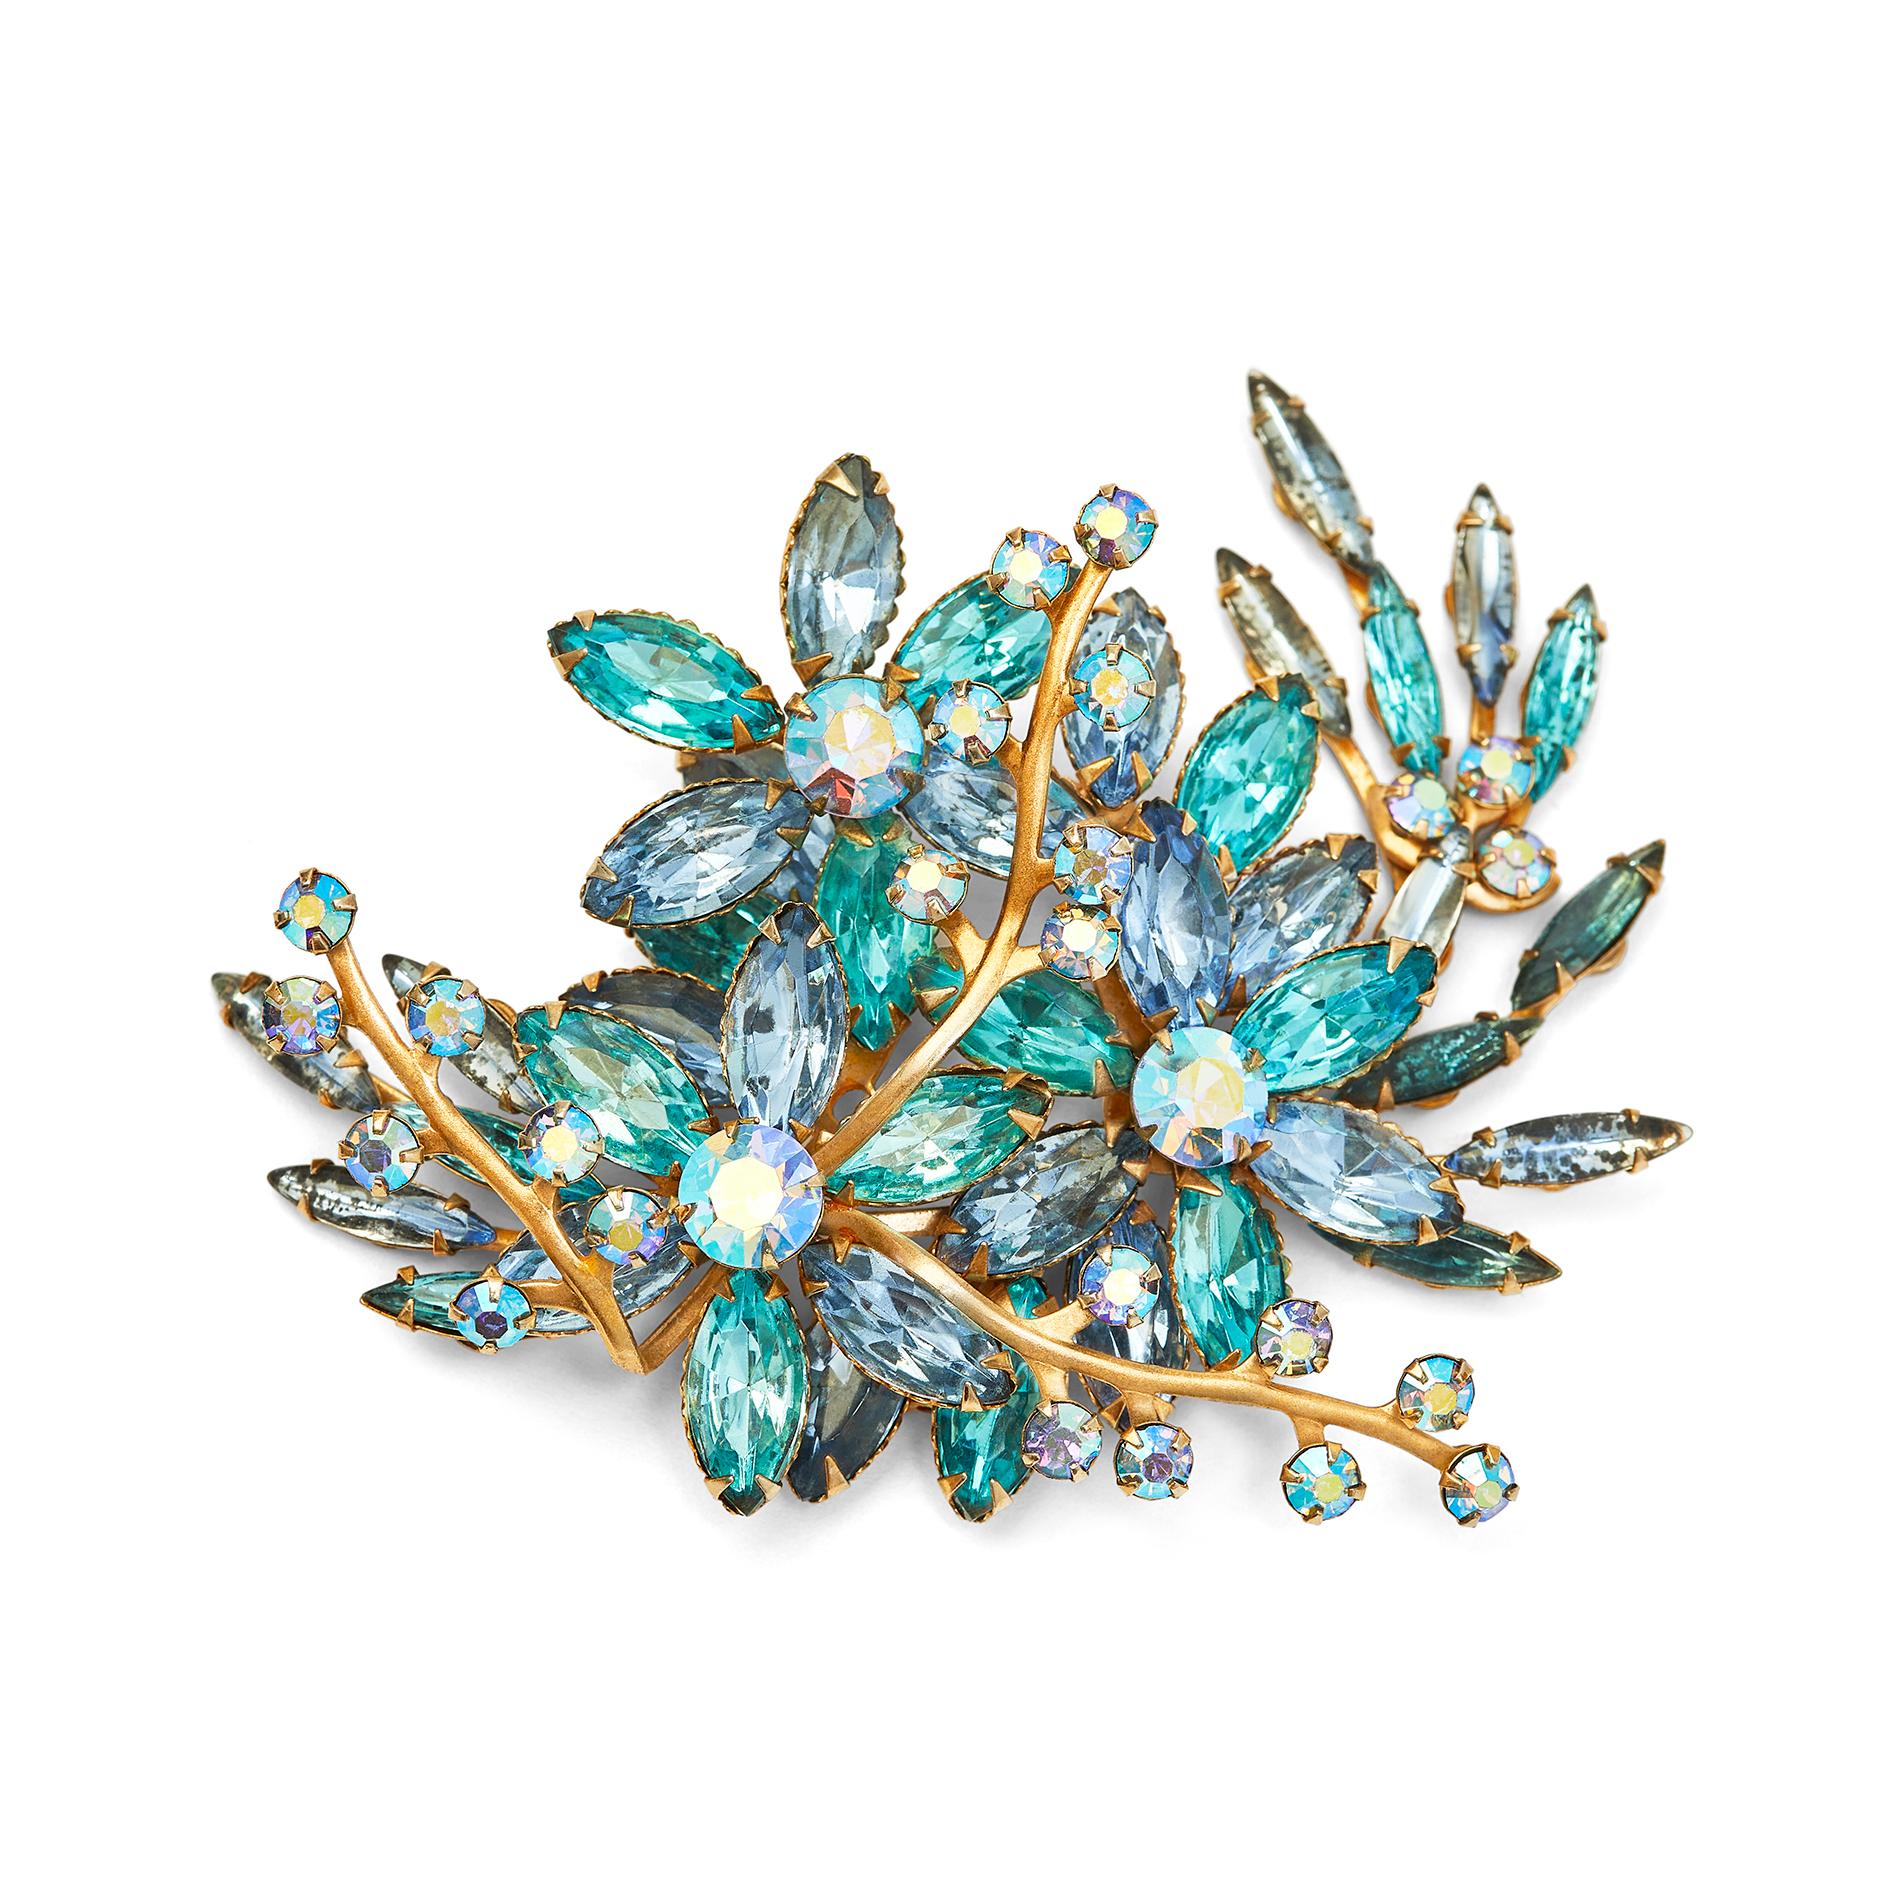 This impressive sized 1950s or early 1960s brooch features a very large spray of flowers and foliage in a mixture of sparkling powder blue and turquoise stones, all individually prong set. Each of the three flowers has five petals and a central